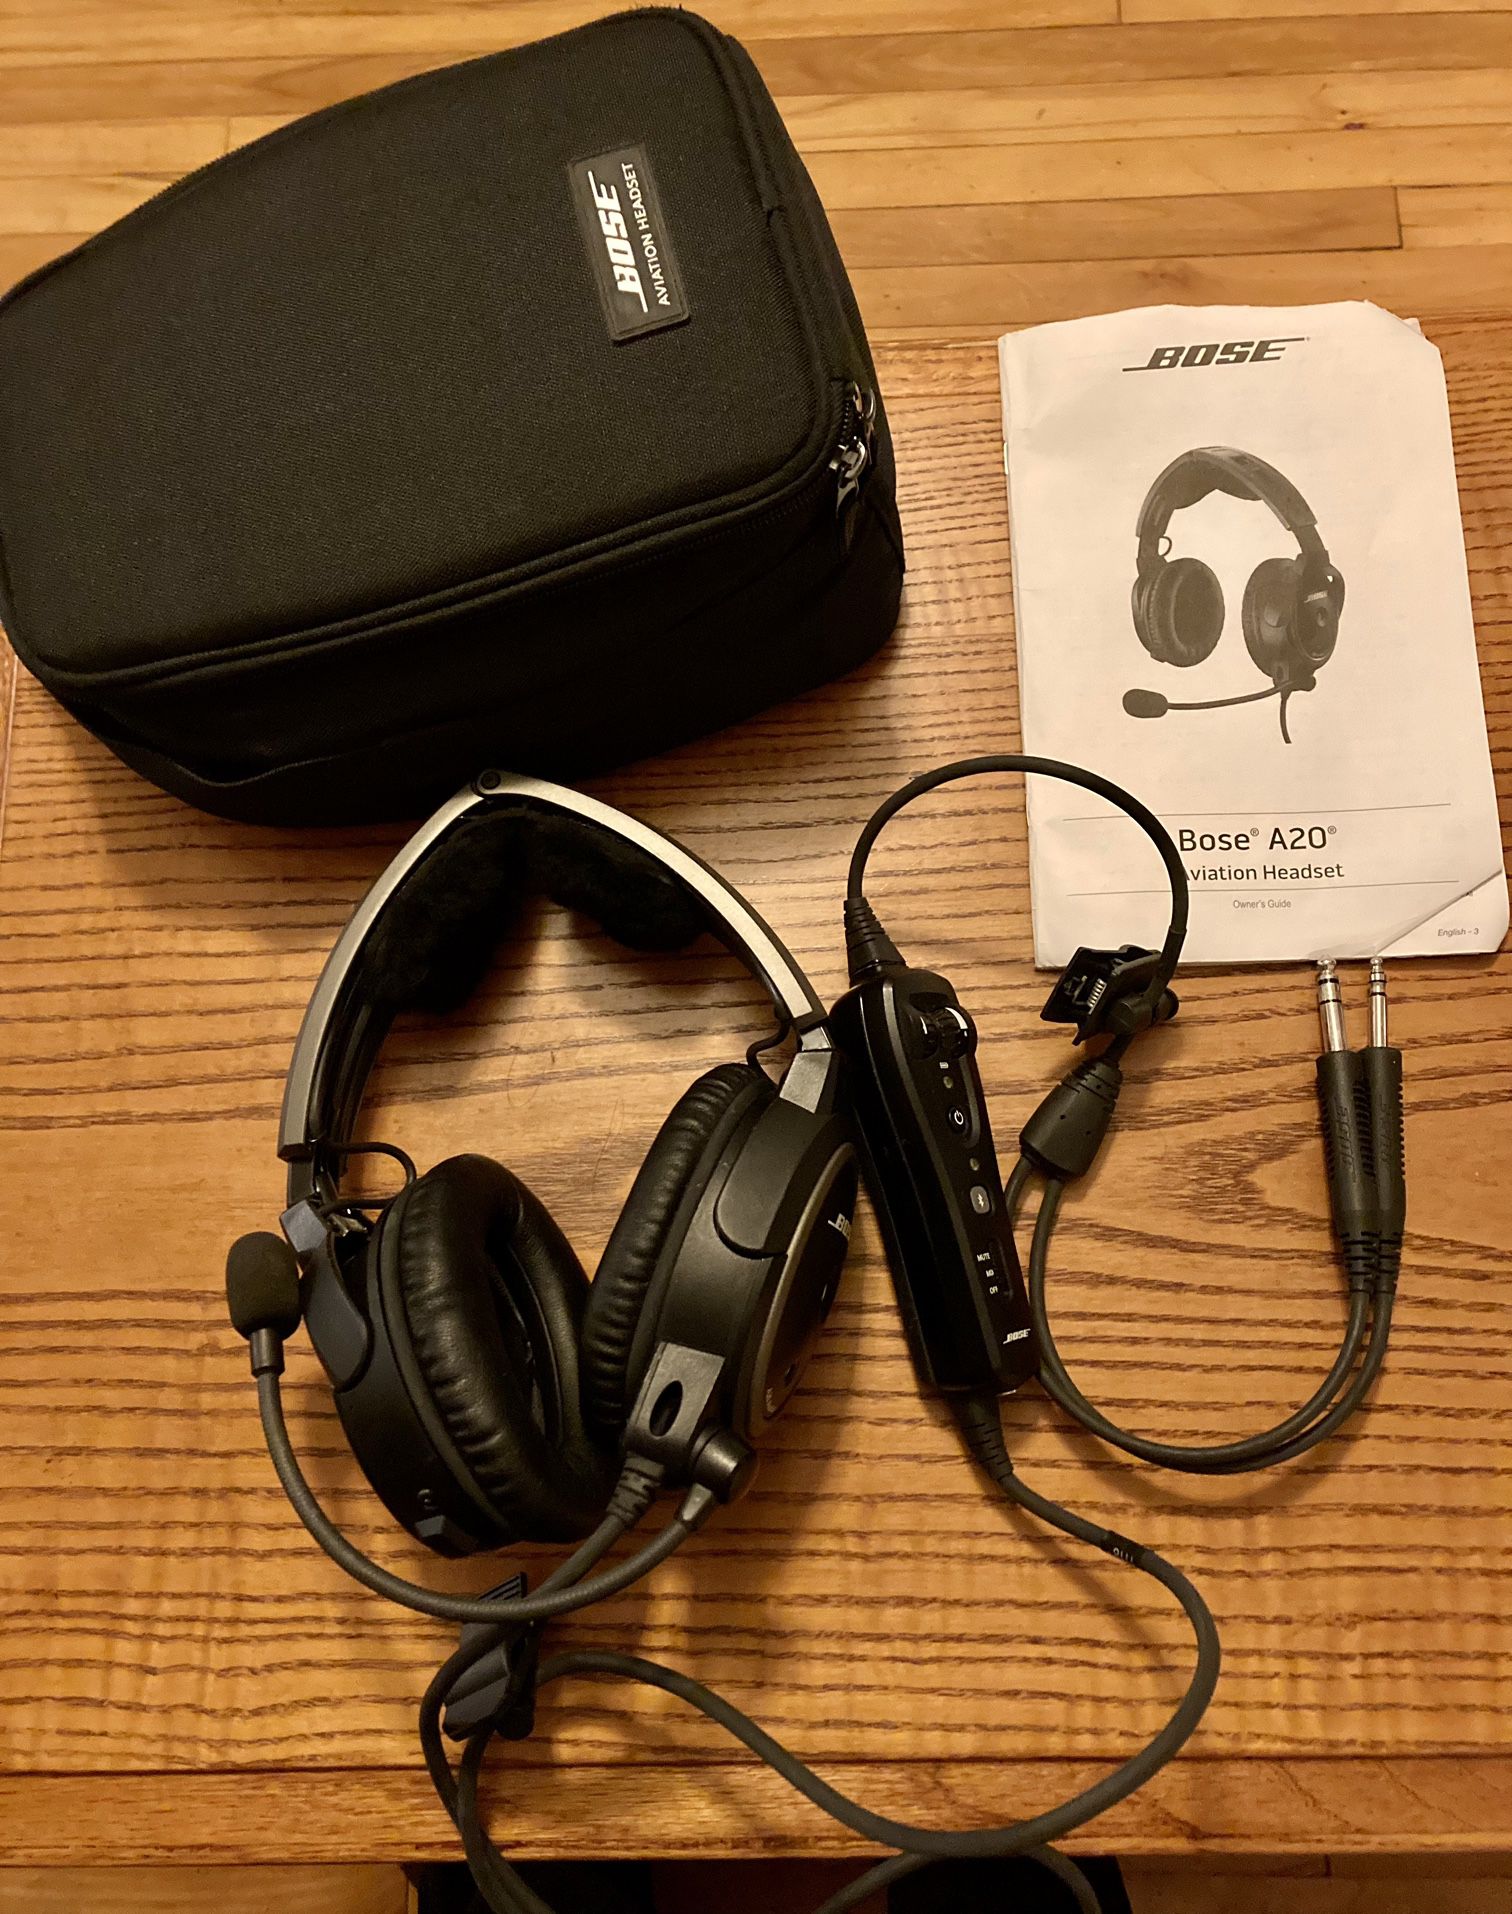 Bose A20 Aviation Headset with Bluetooth®, dual plug, straight cable